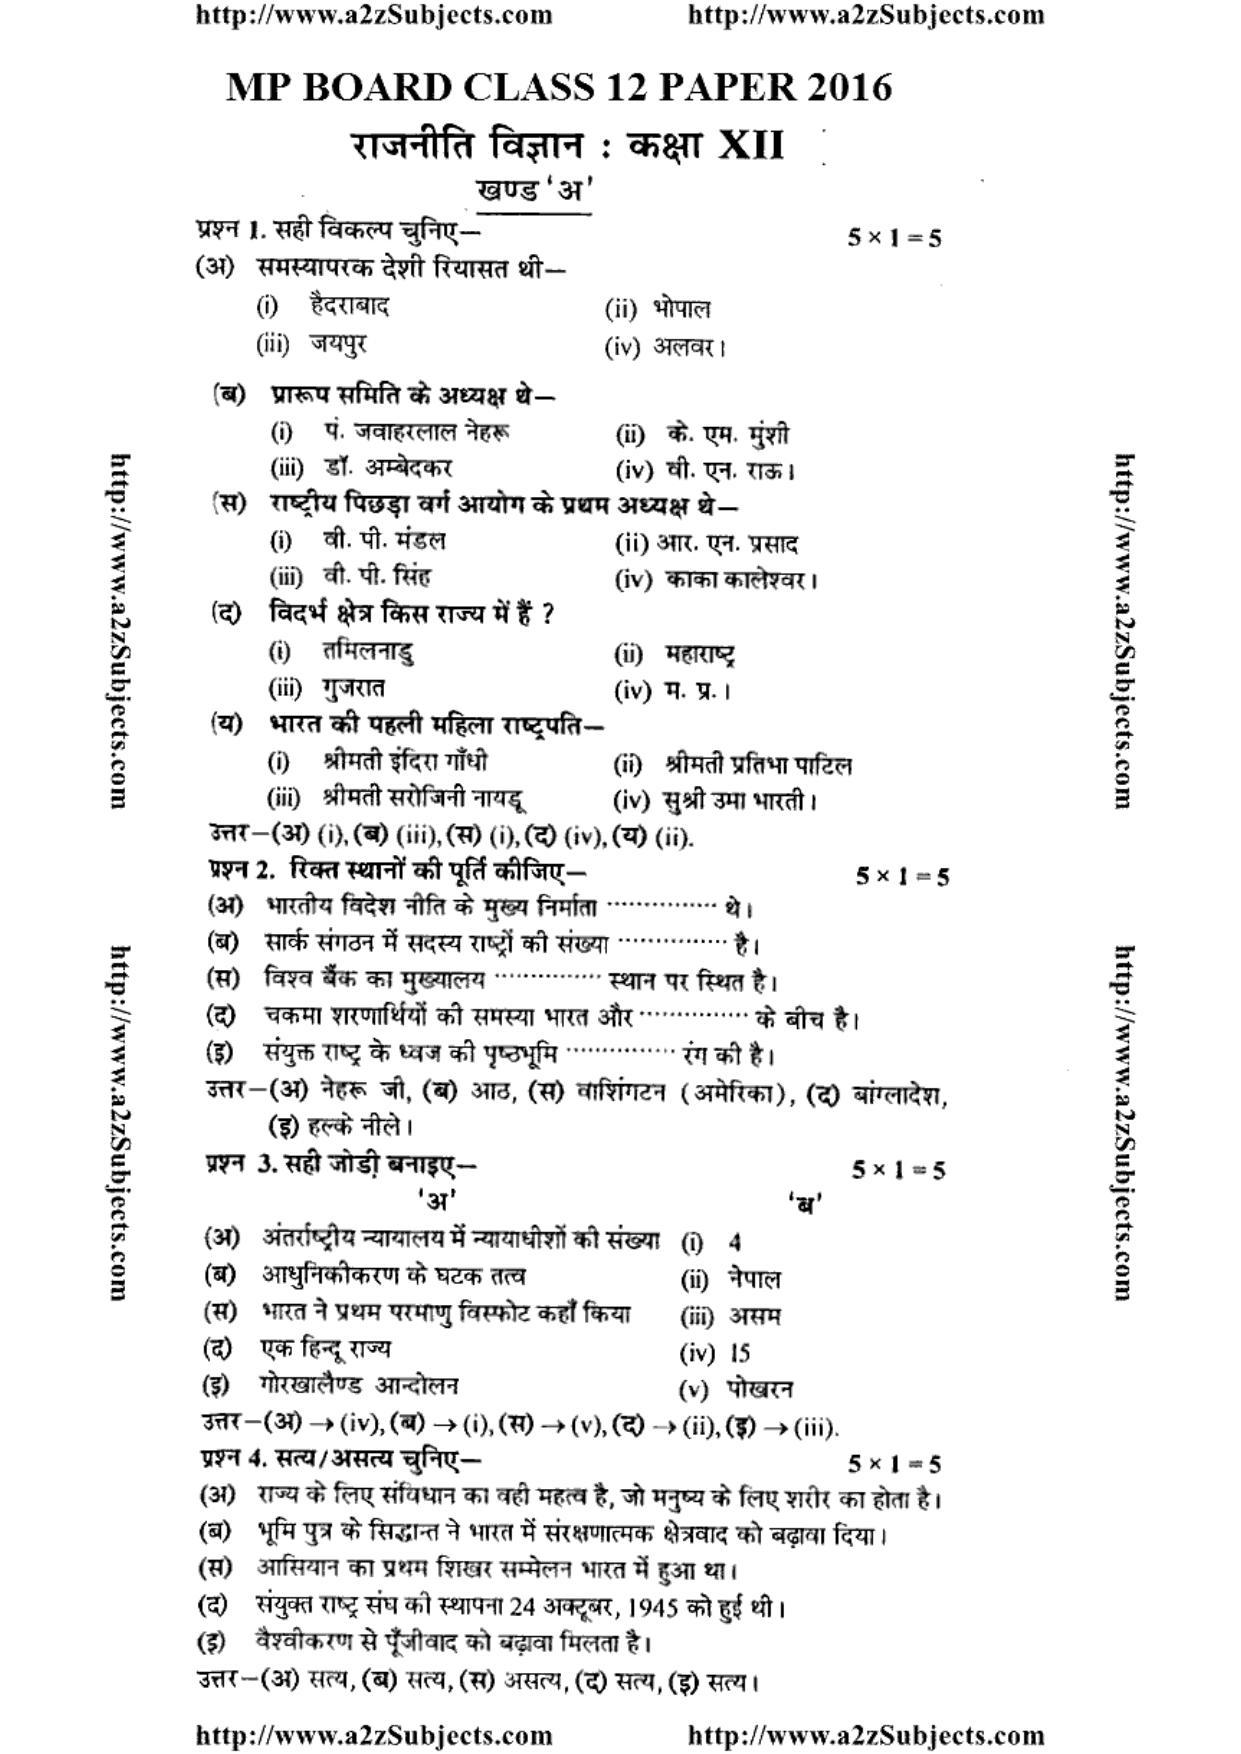 MP Board Class 12 Political Science 2016 Question Paper - Page 1